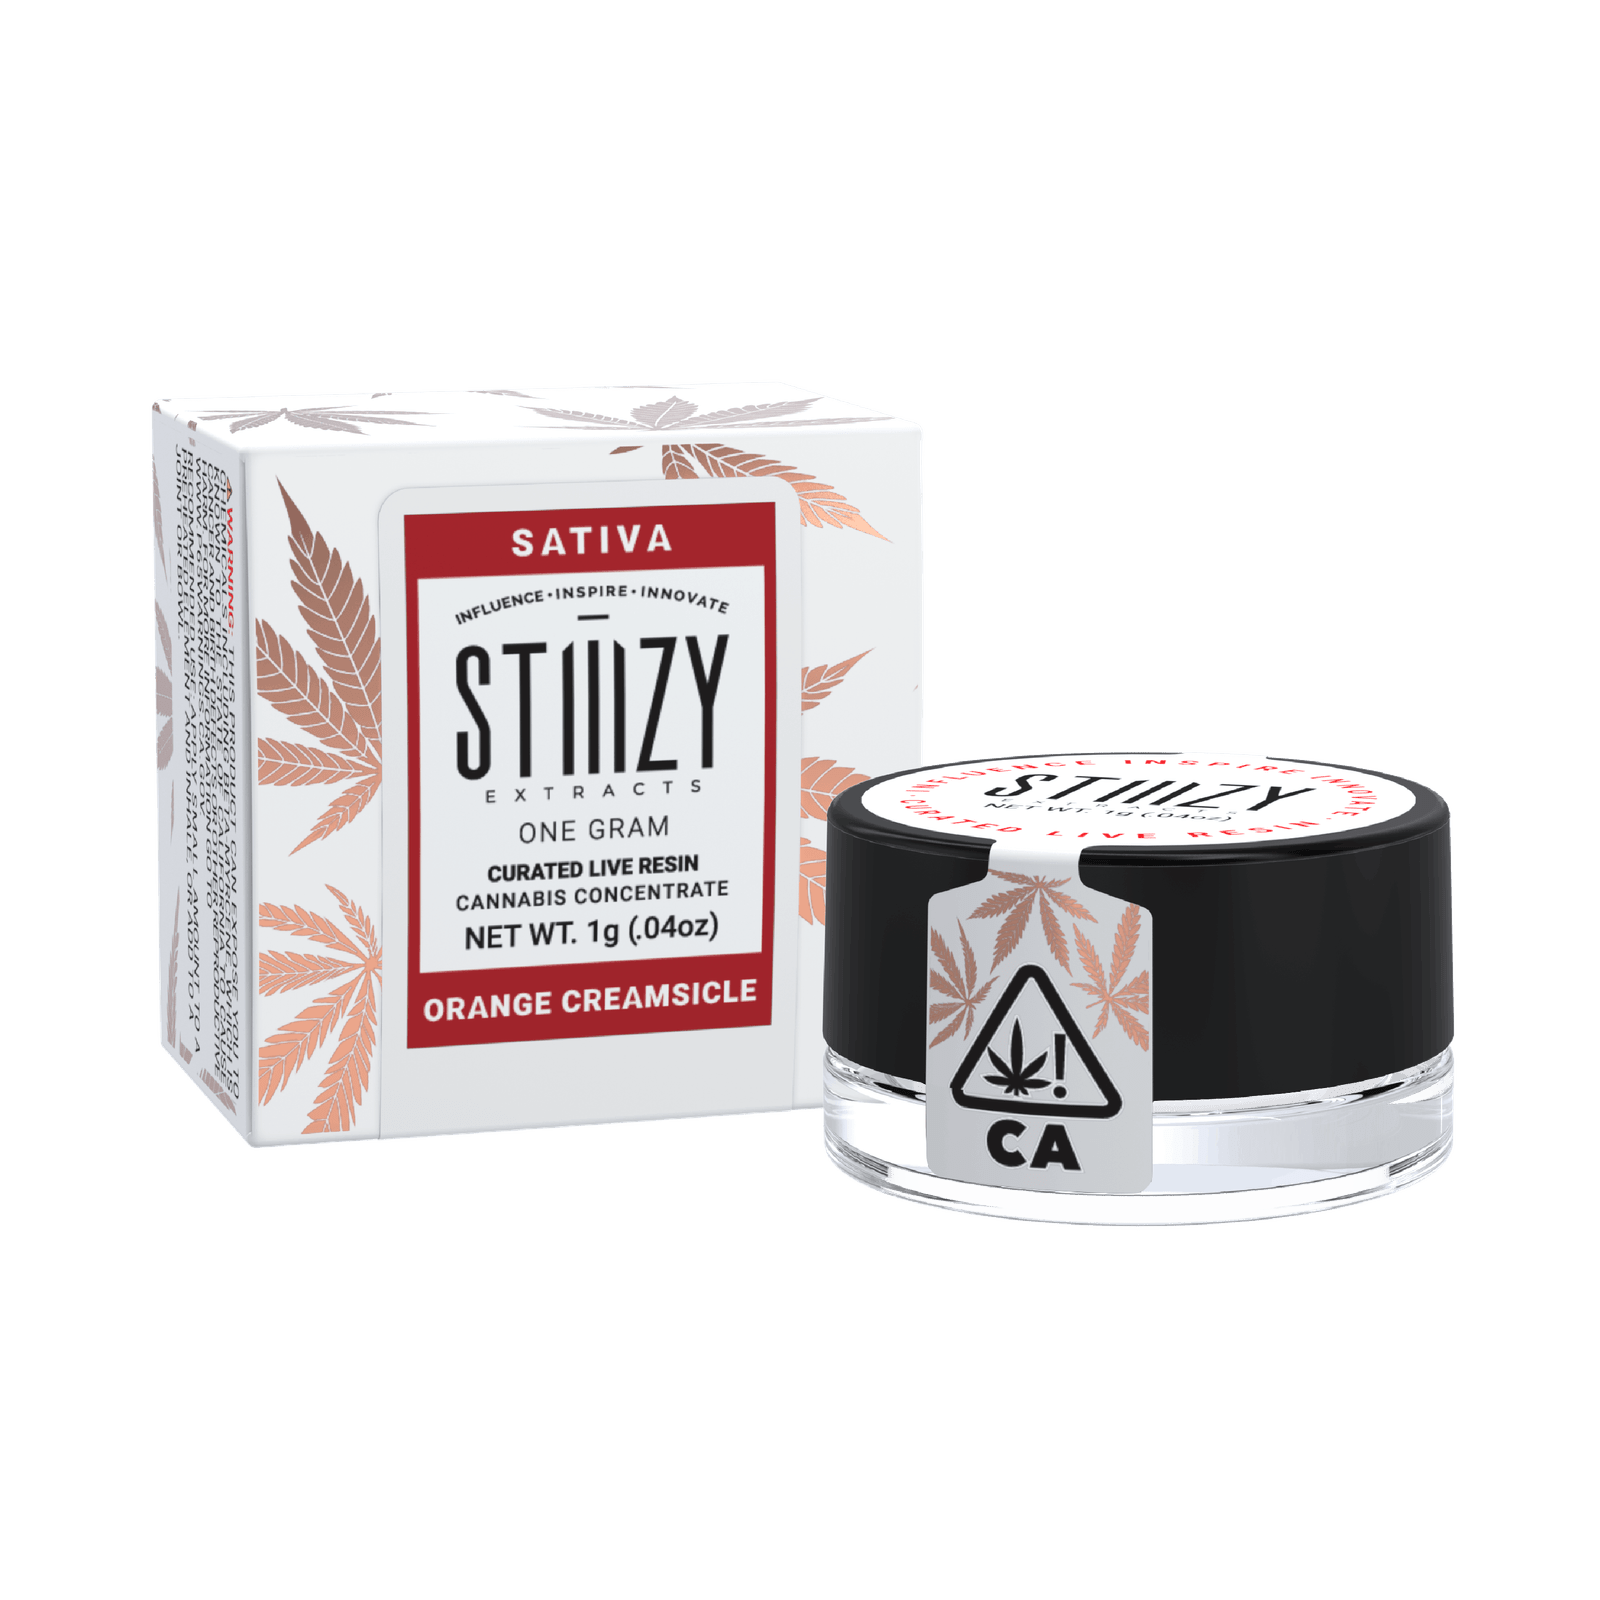 STIIIZY (Curated Live Resin) - 1G Orange Creamsicle